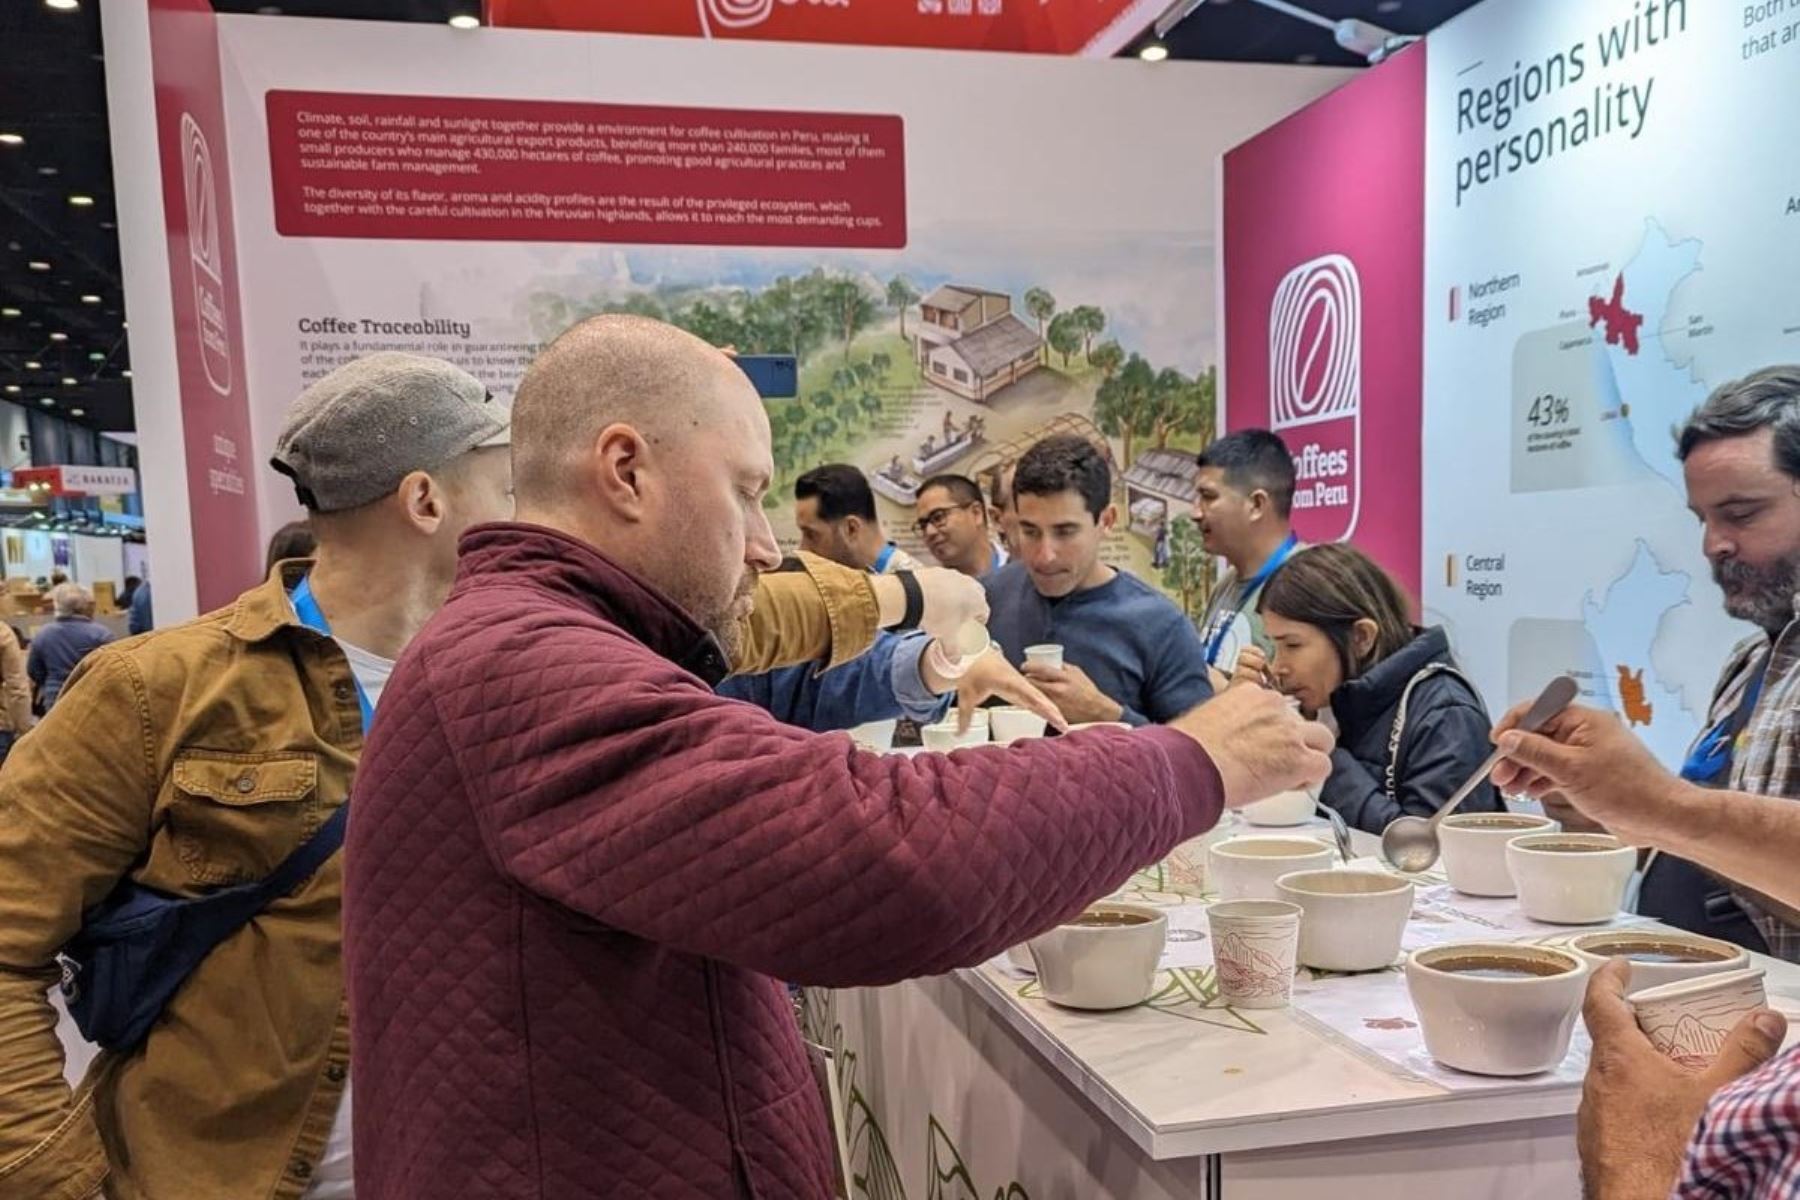 Peru’s specialty coffee producers see business opportunities worth US$33.8 million in US